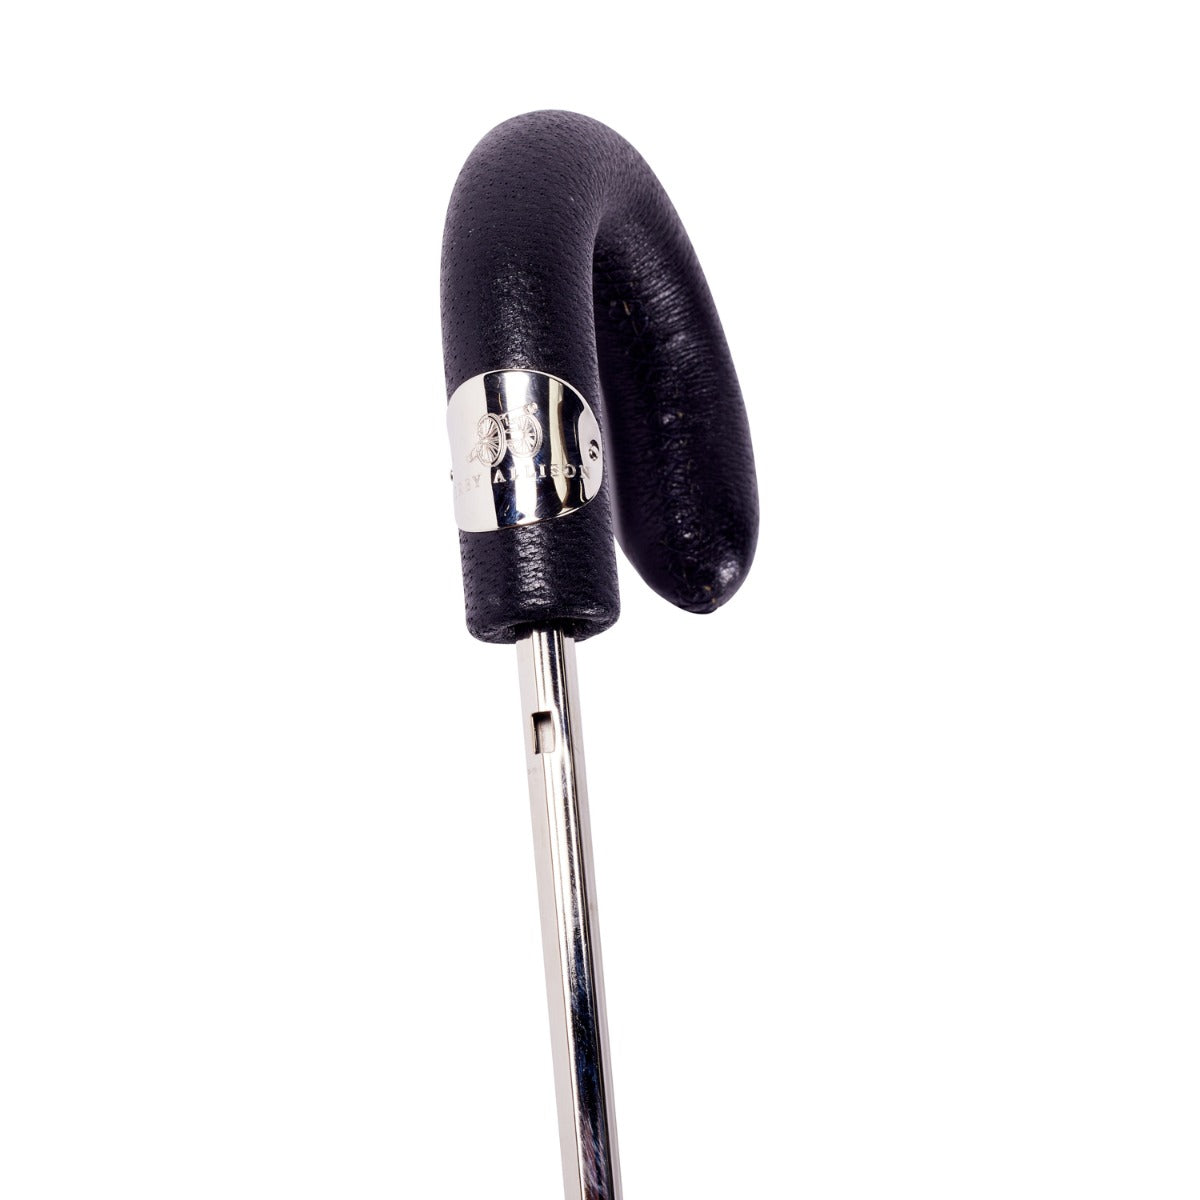 A black Black Pigskin Travel Umbrella with Black Canopy cane with a silver handle and pigskin handle by KirbyAllison.com.